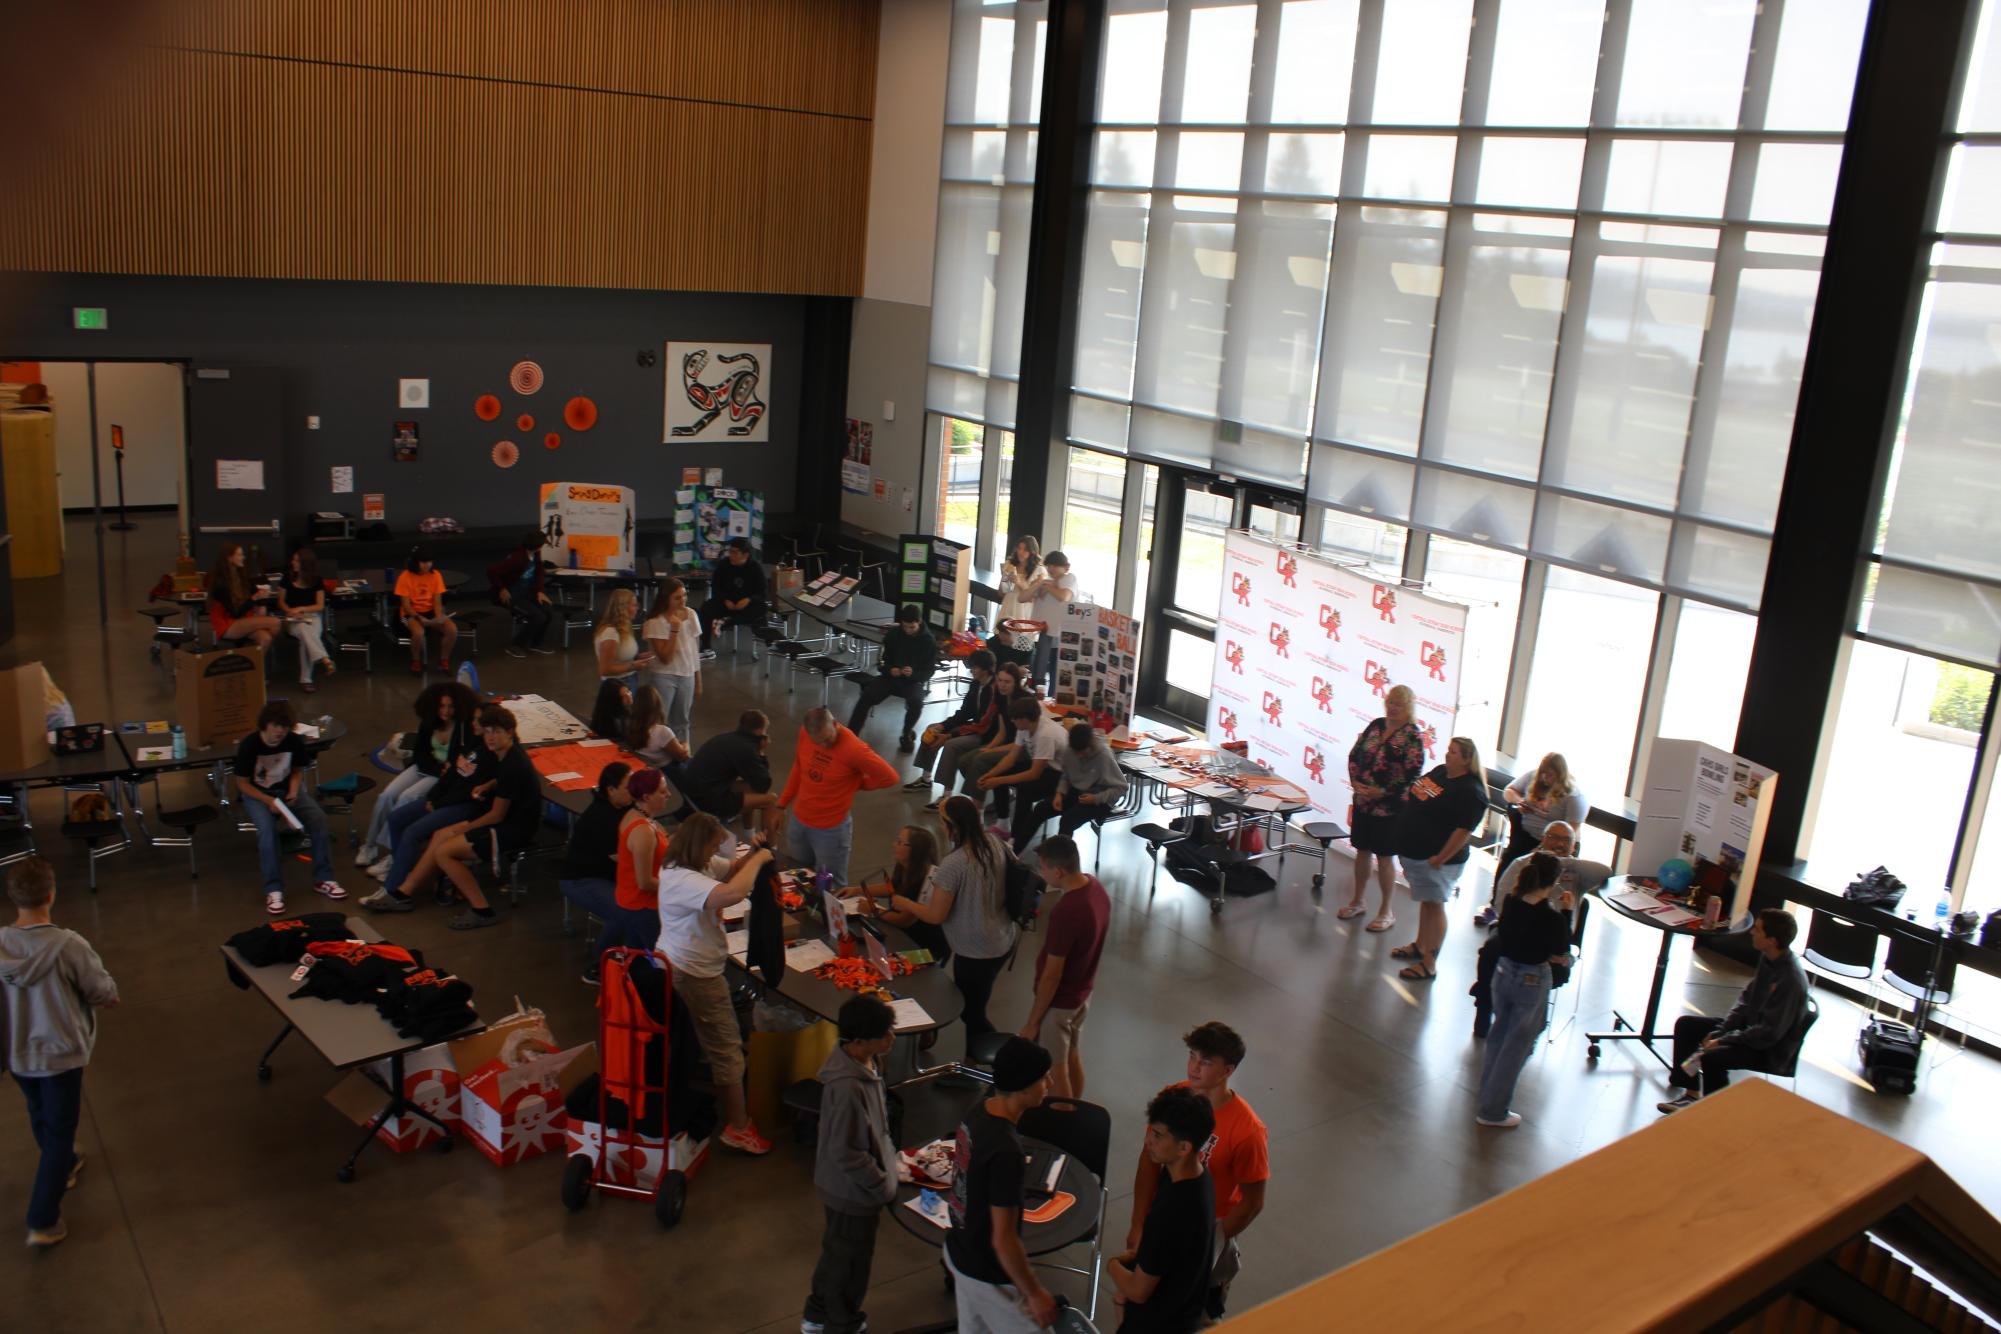 An overhead view of the CKHS Commons, where clubs from around the school set up booths for advertisement and recruitment.